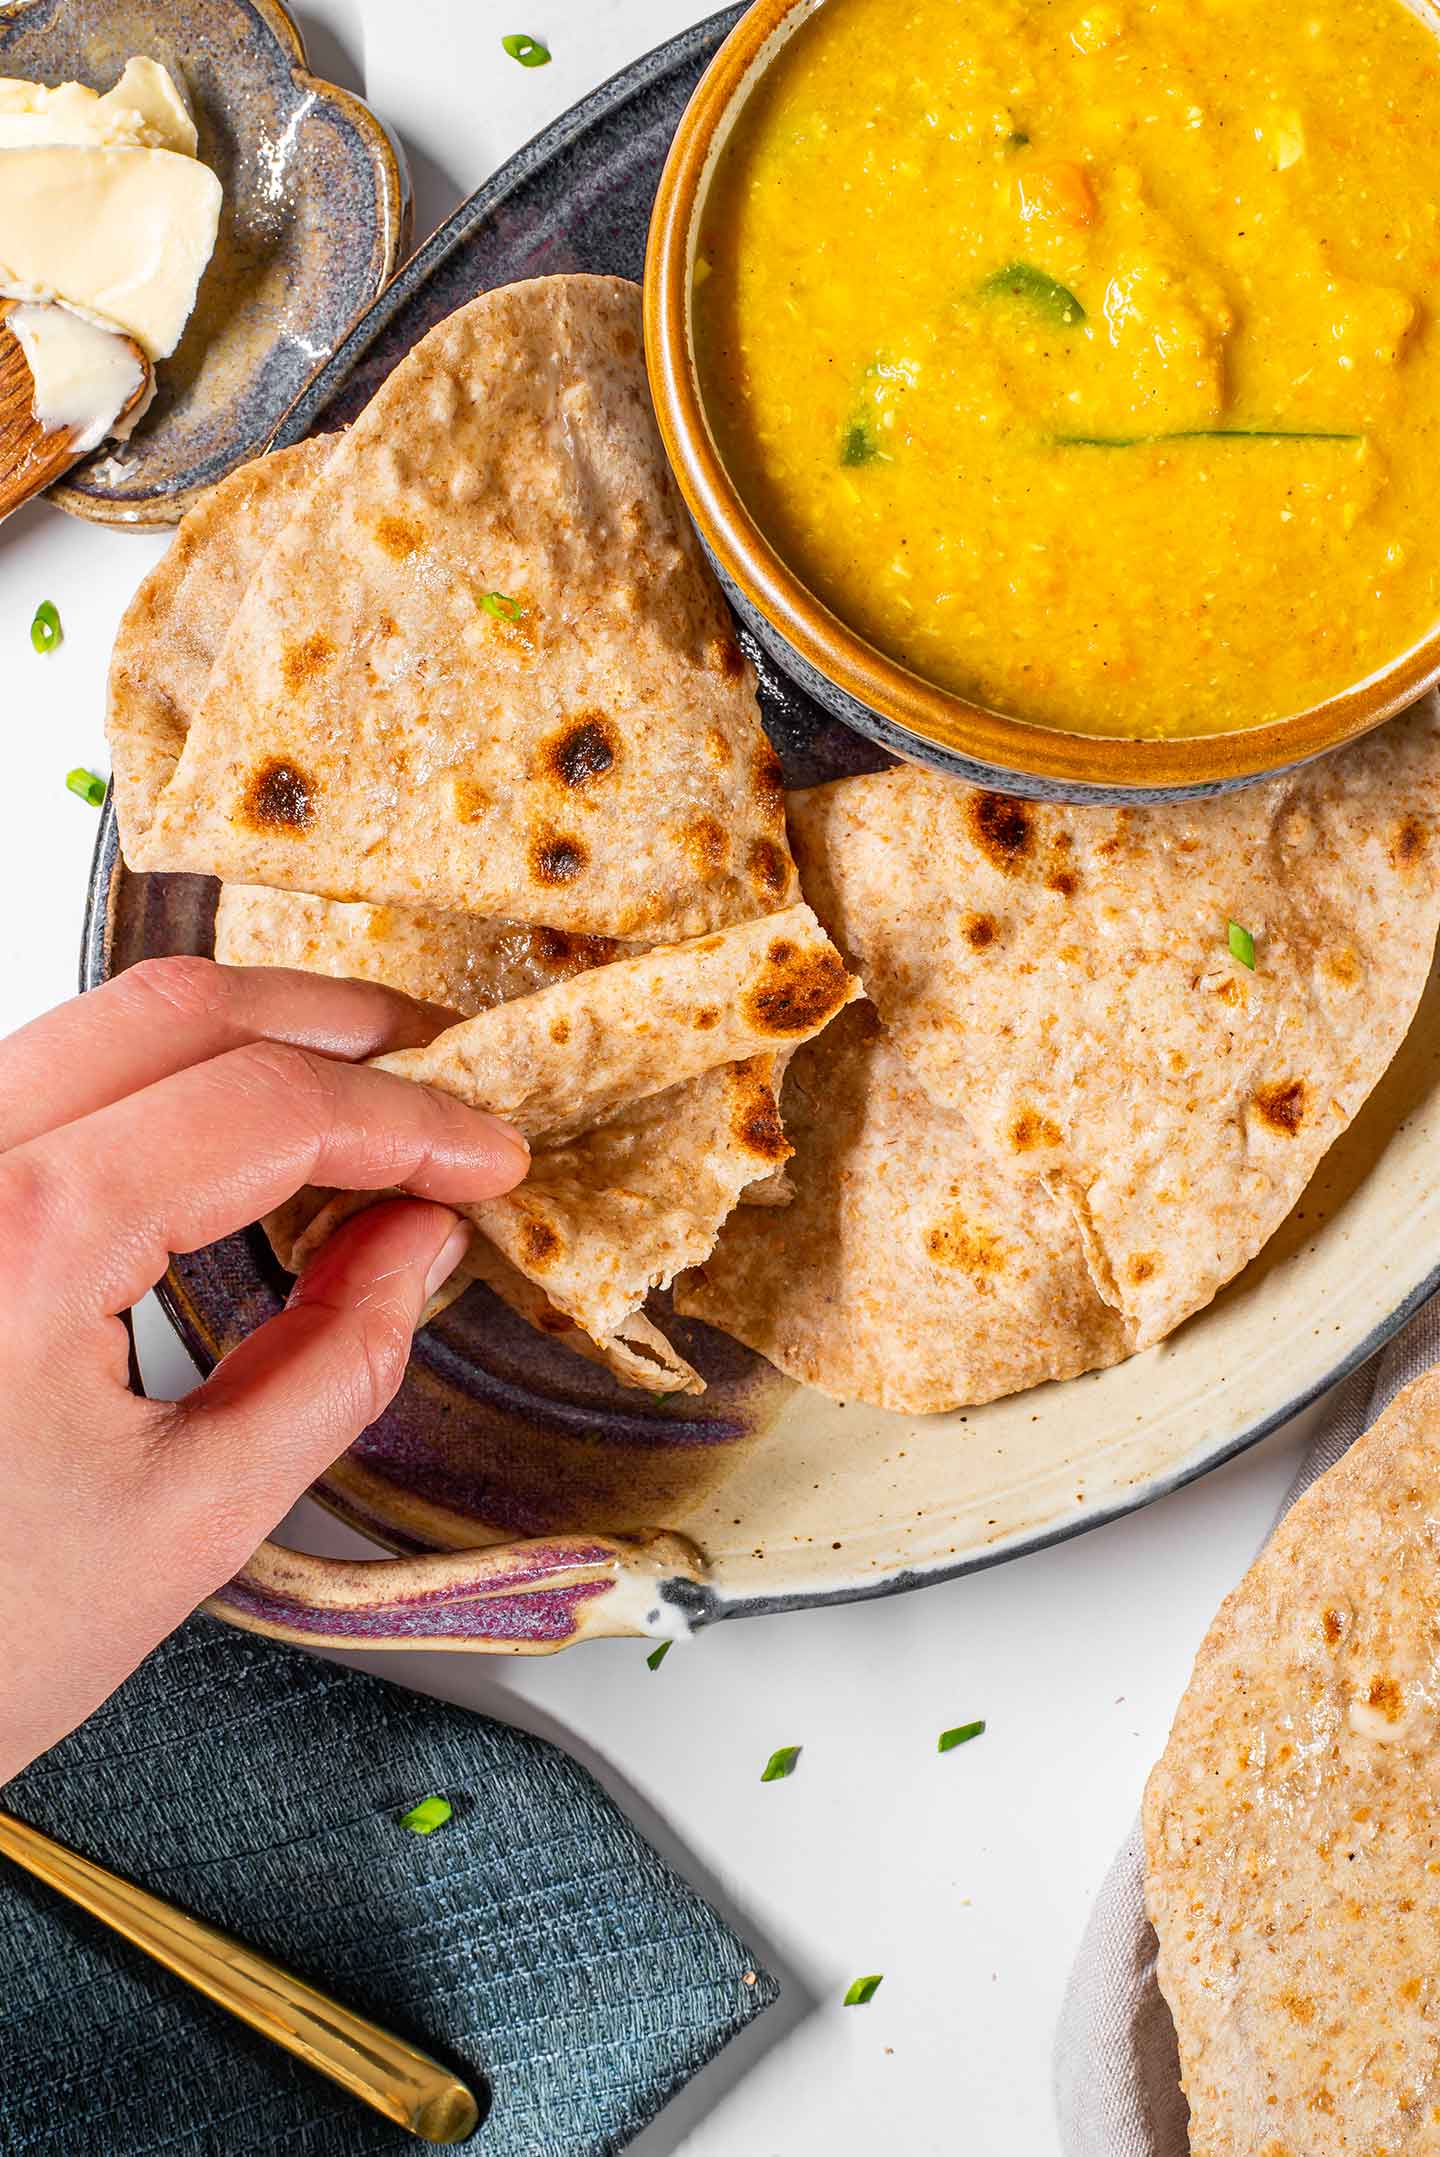 Top down view of a hand folding roti and preparing to dip it into a bowl of dal.